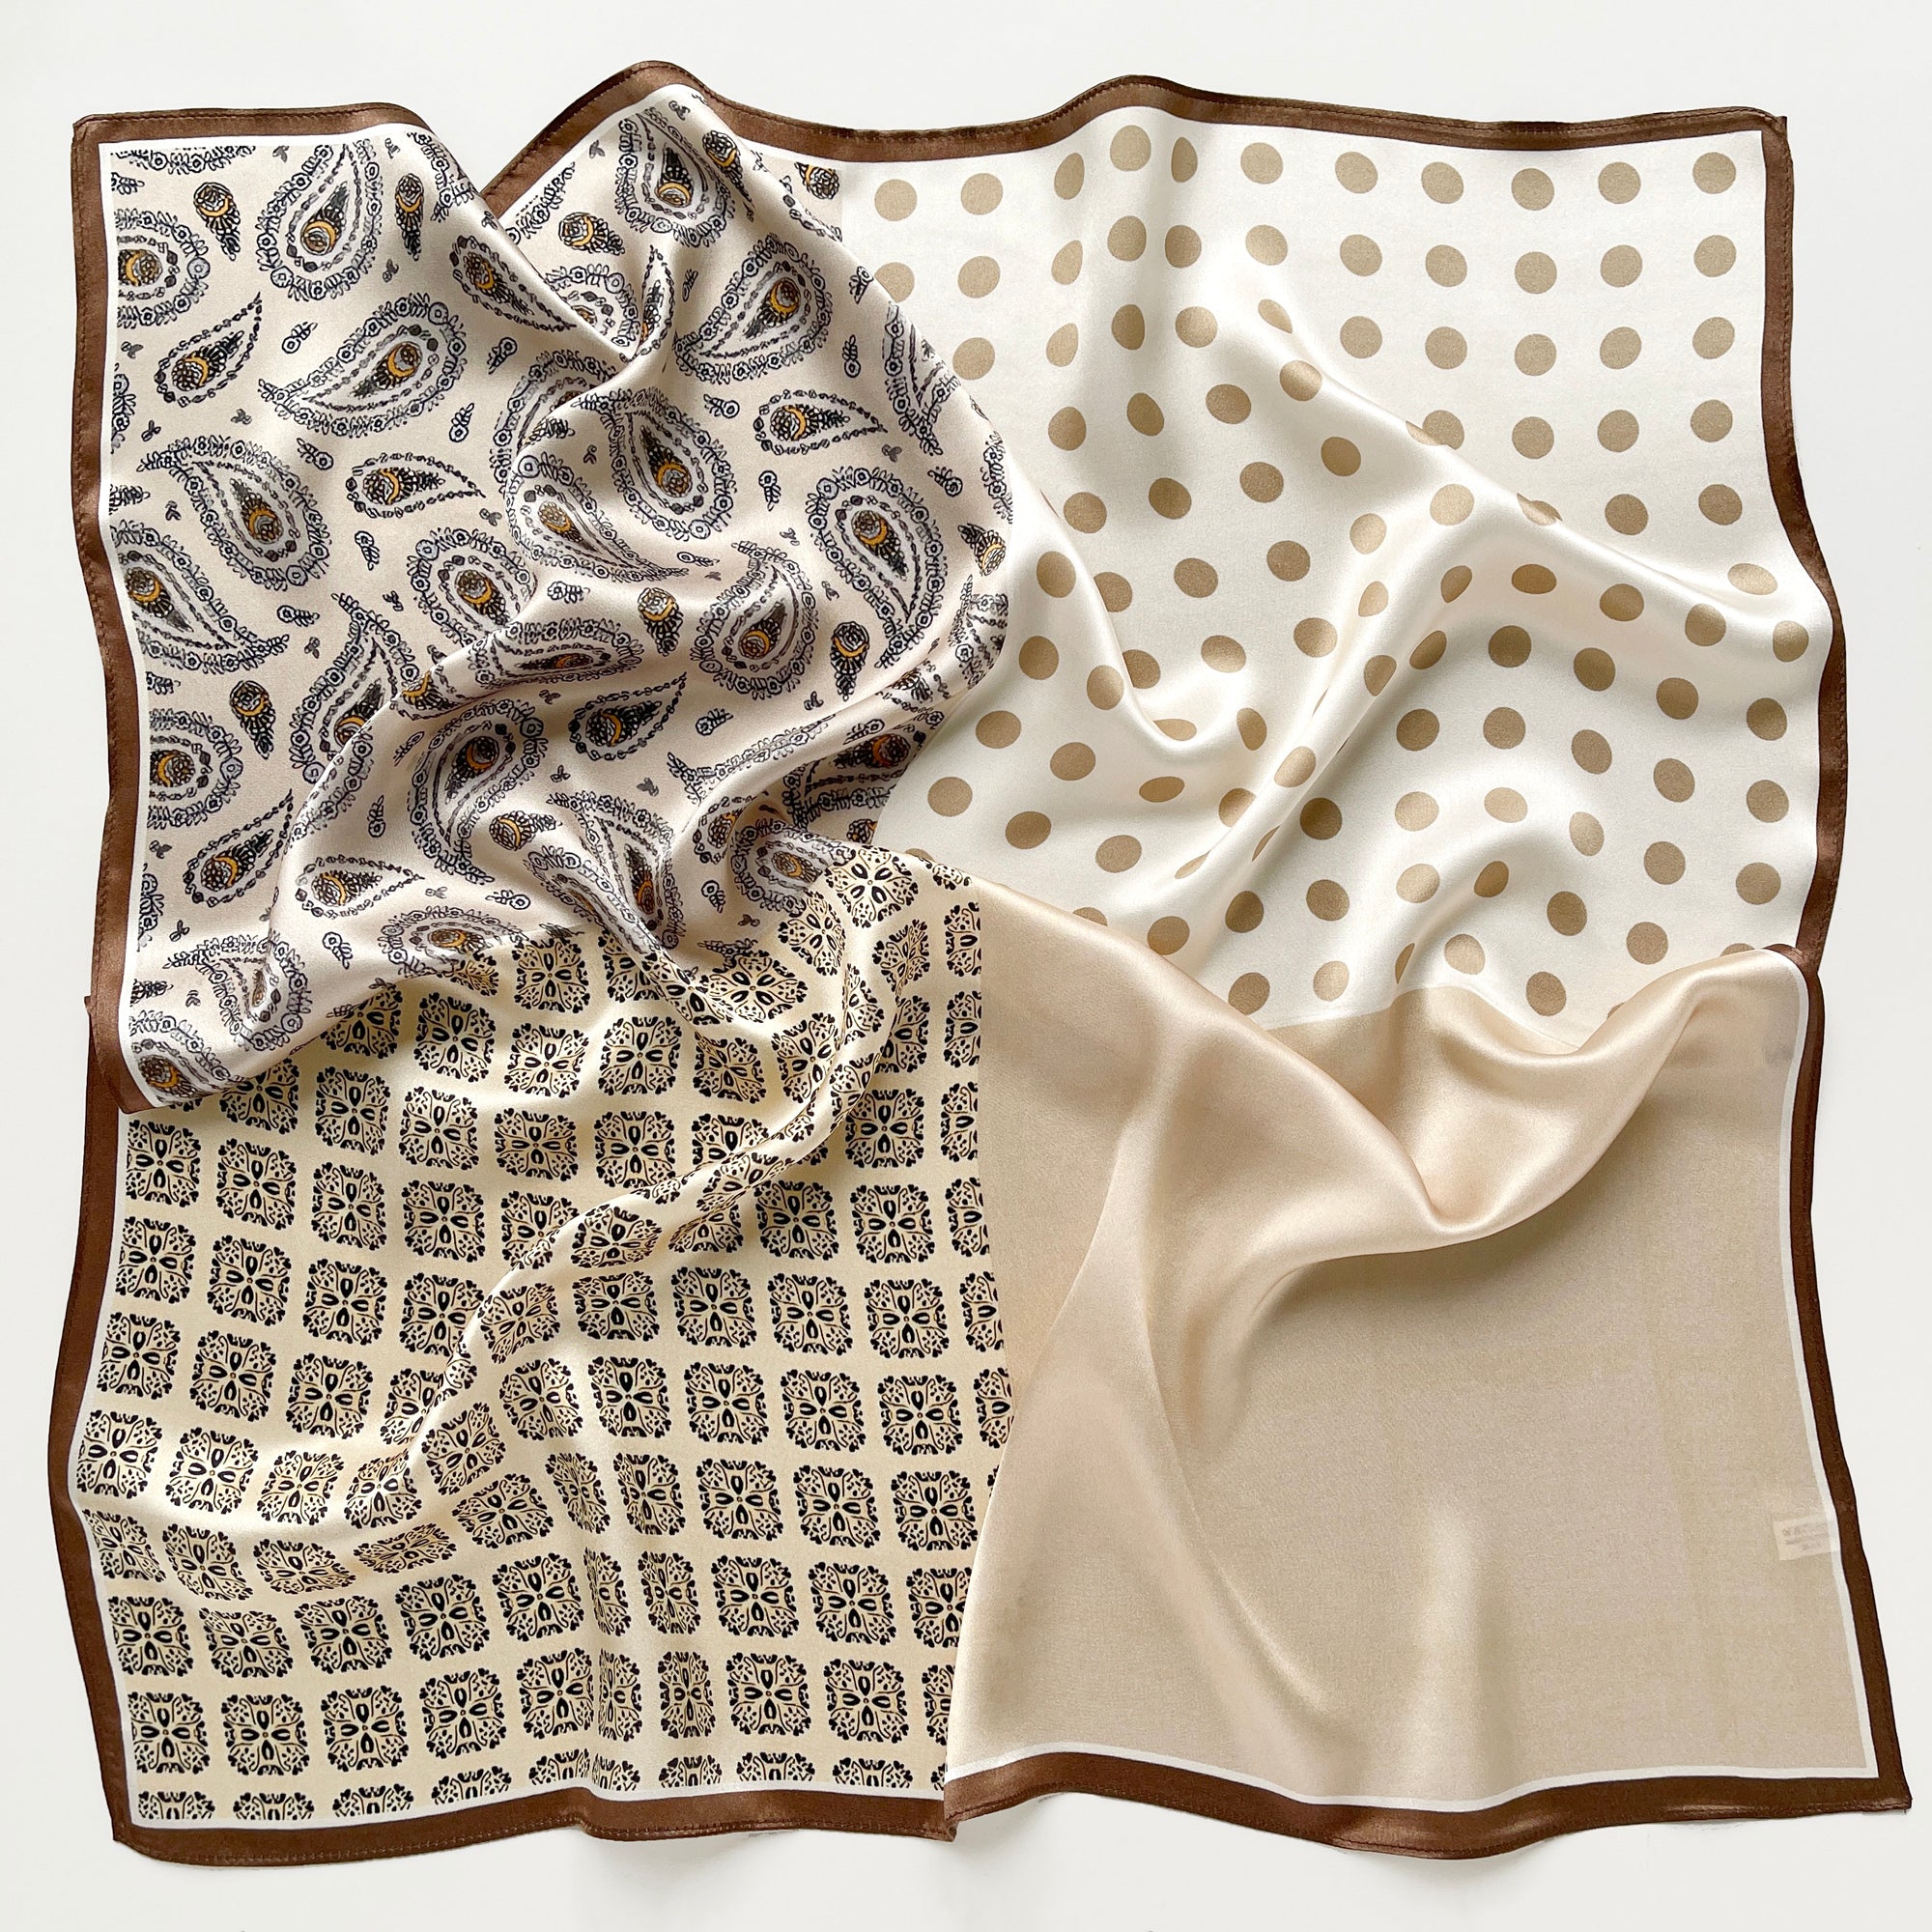 a beige and brown earth tones square silk scarf featuring bohemian paisley and polka dot prints with brown edges